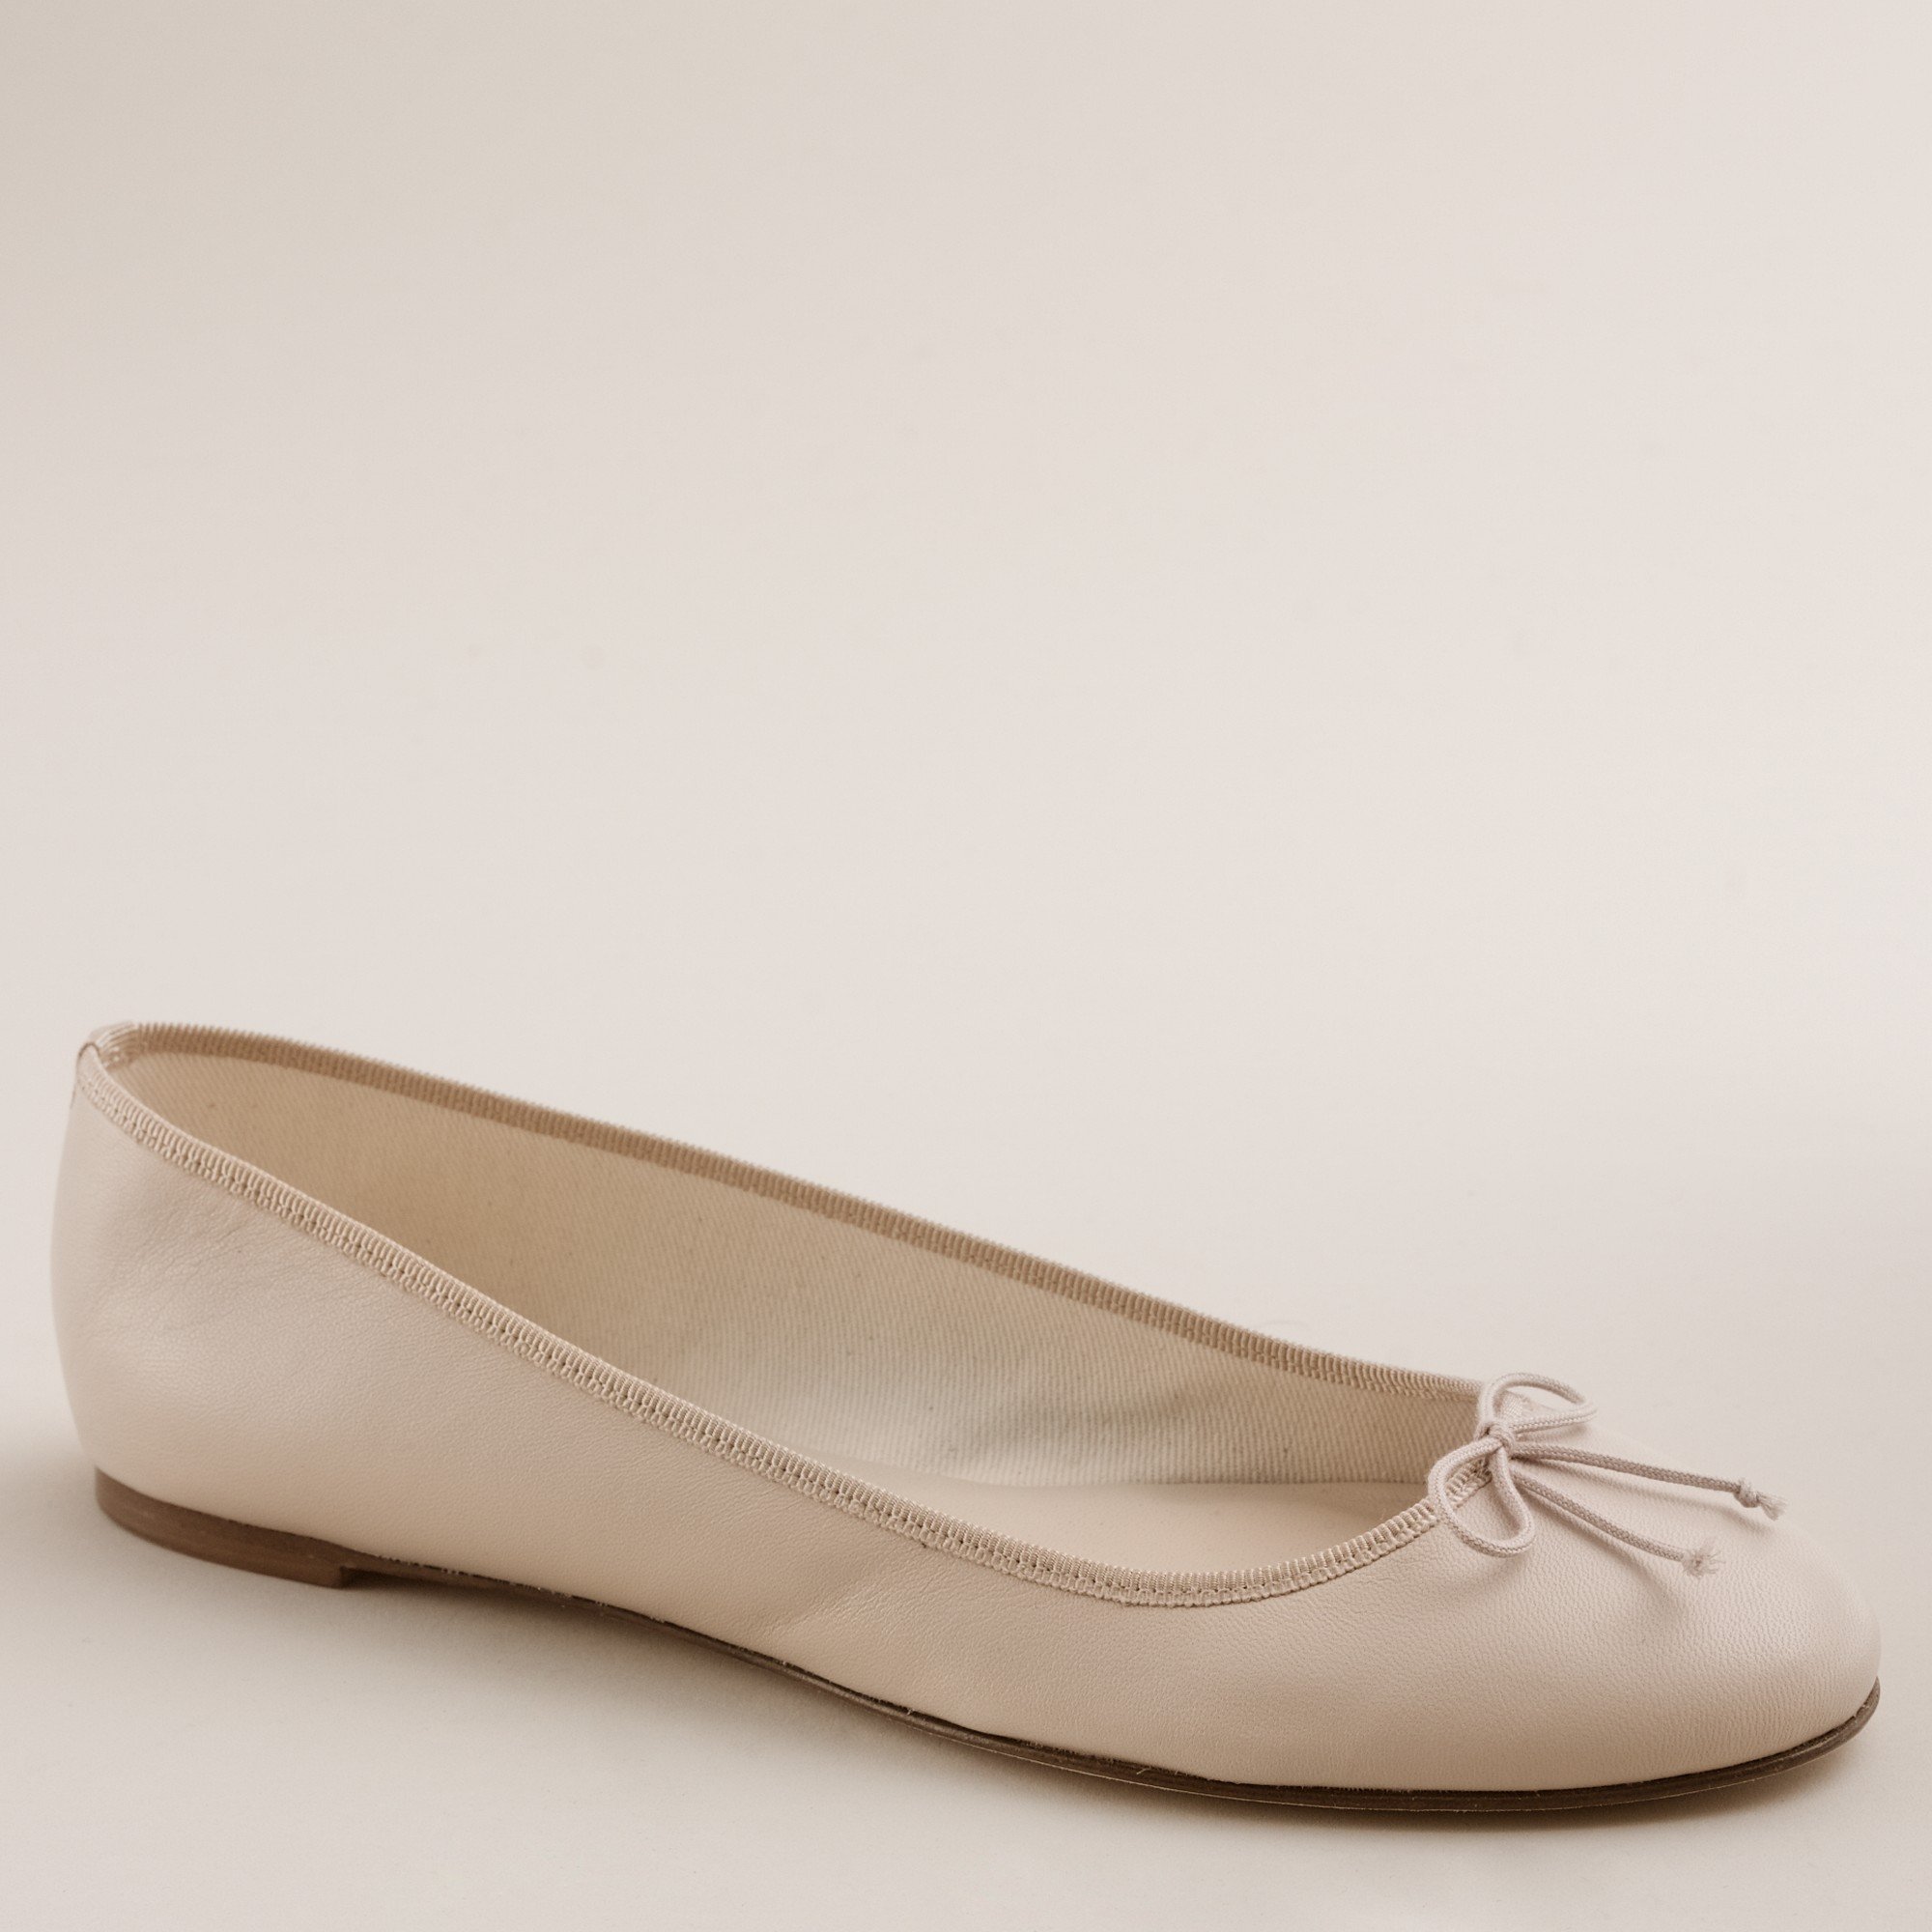 J.crew Classic Leather Ballet Flats in Natural | Lyst